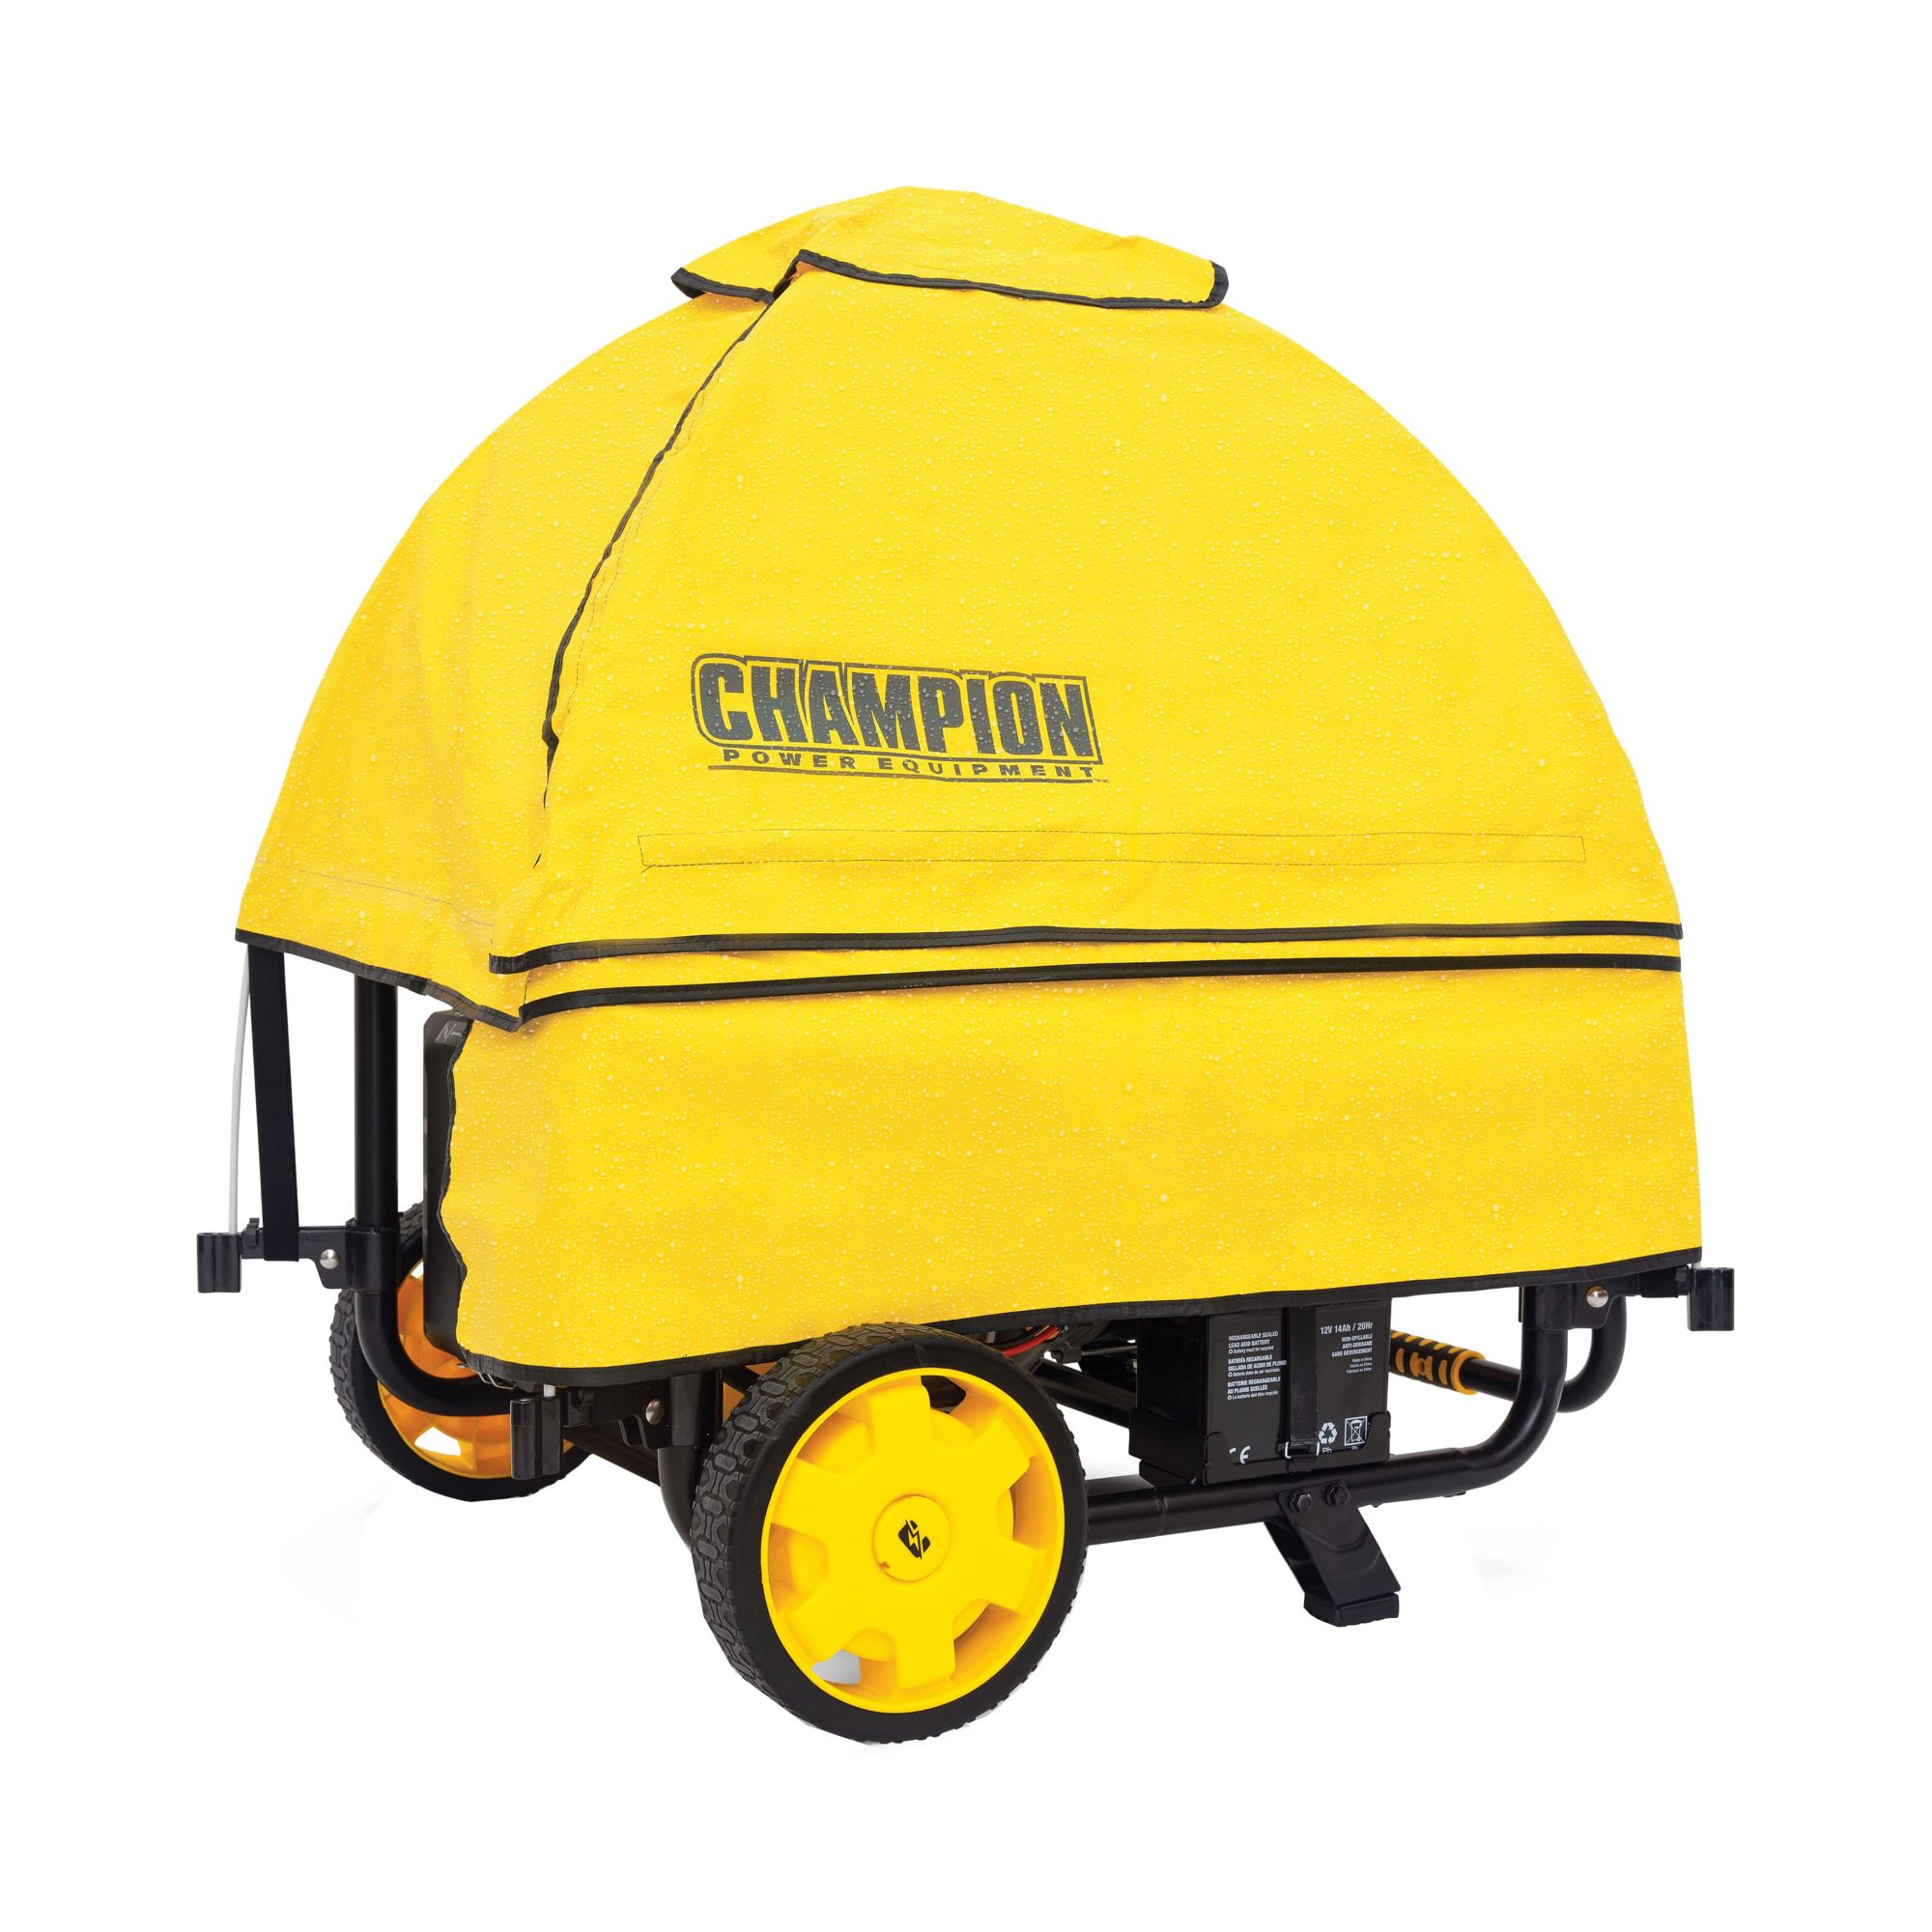 Champion Storm Shield Severe Weather Portable Generator Cover by GenTent for 4,000 to 12,500 Starting Watt Generators